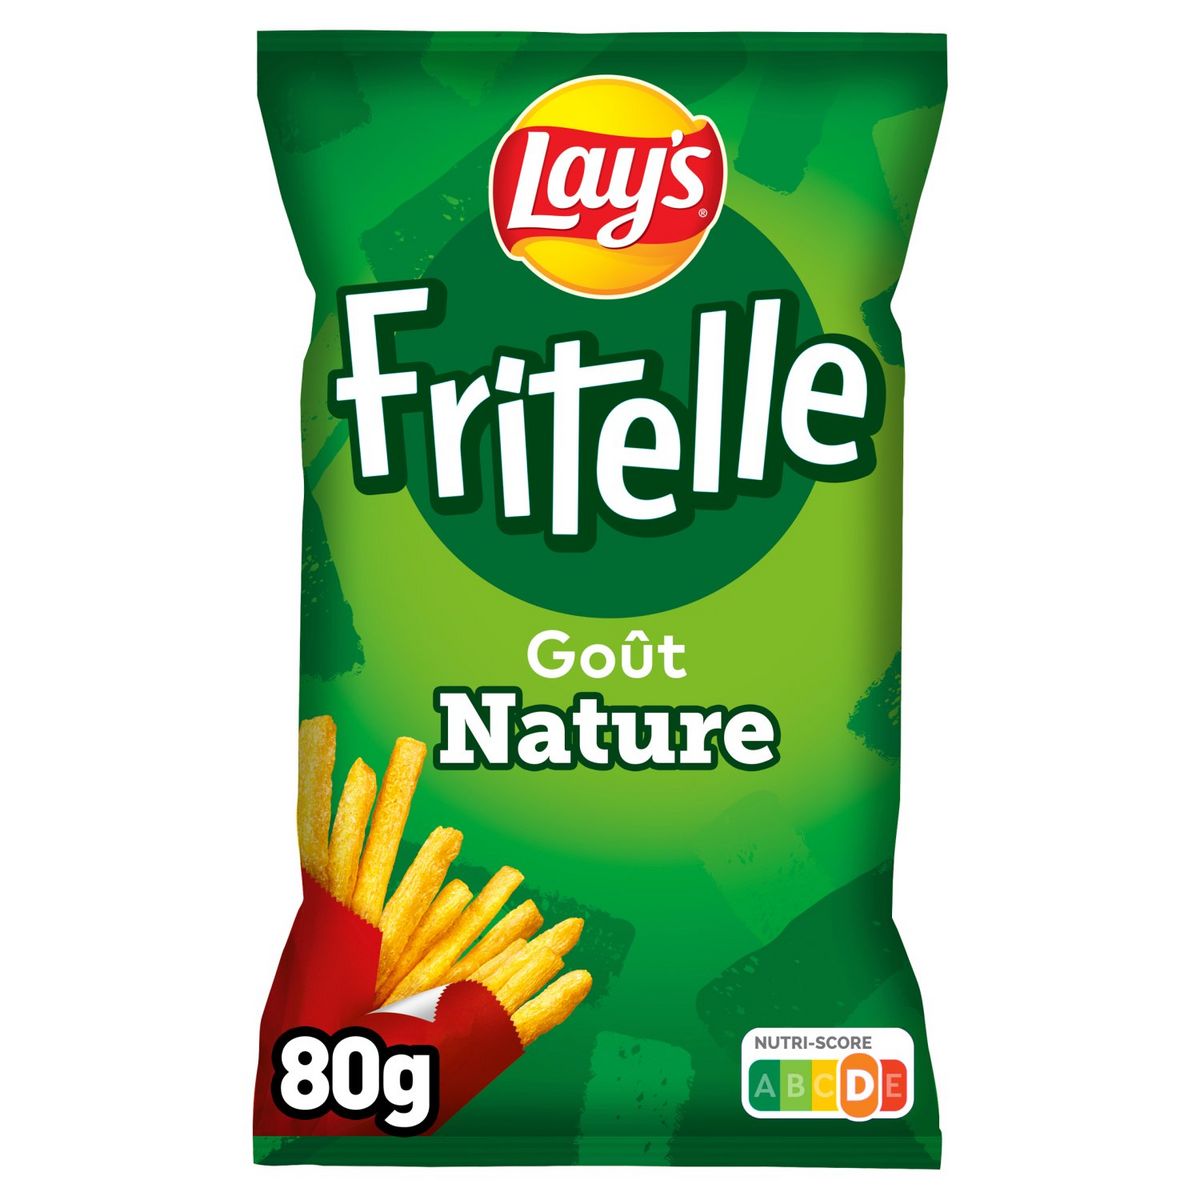 LAY'S Frites nature Fritelle 80g